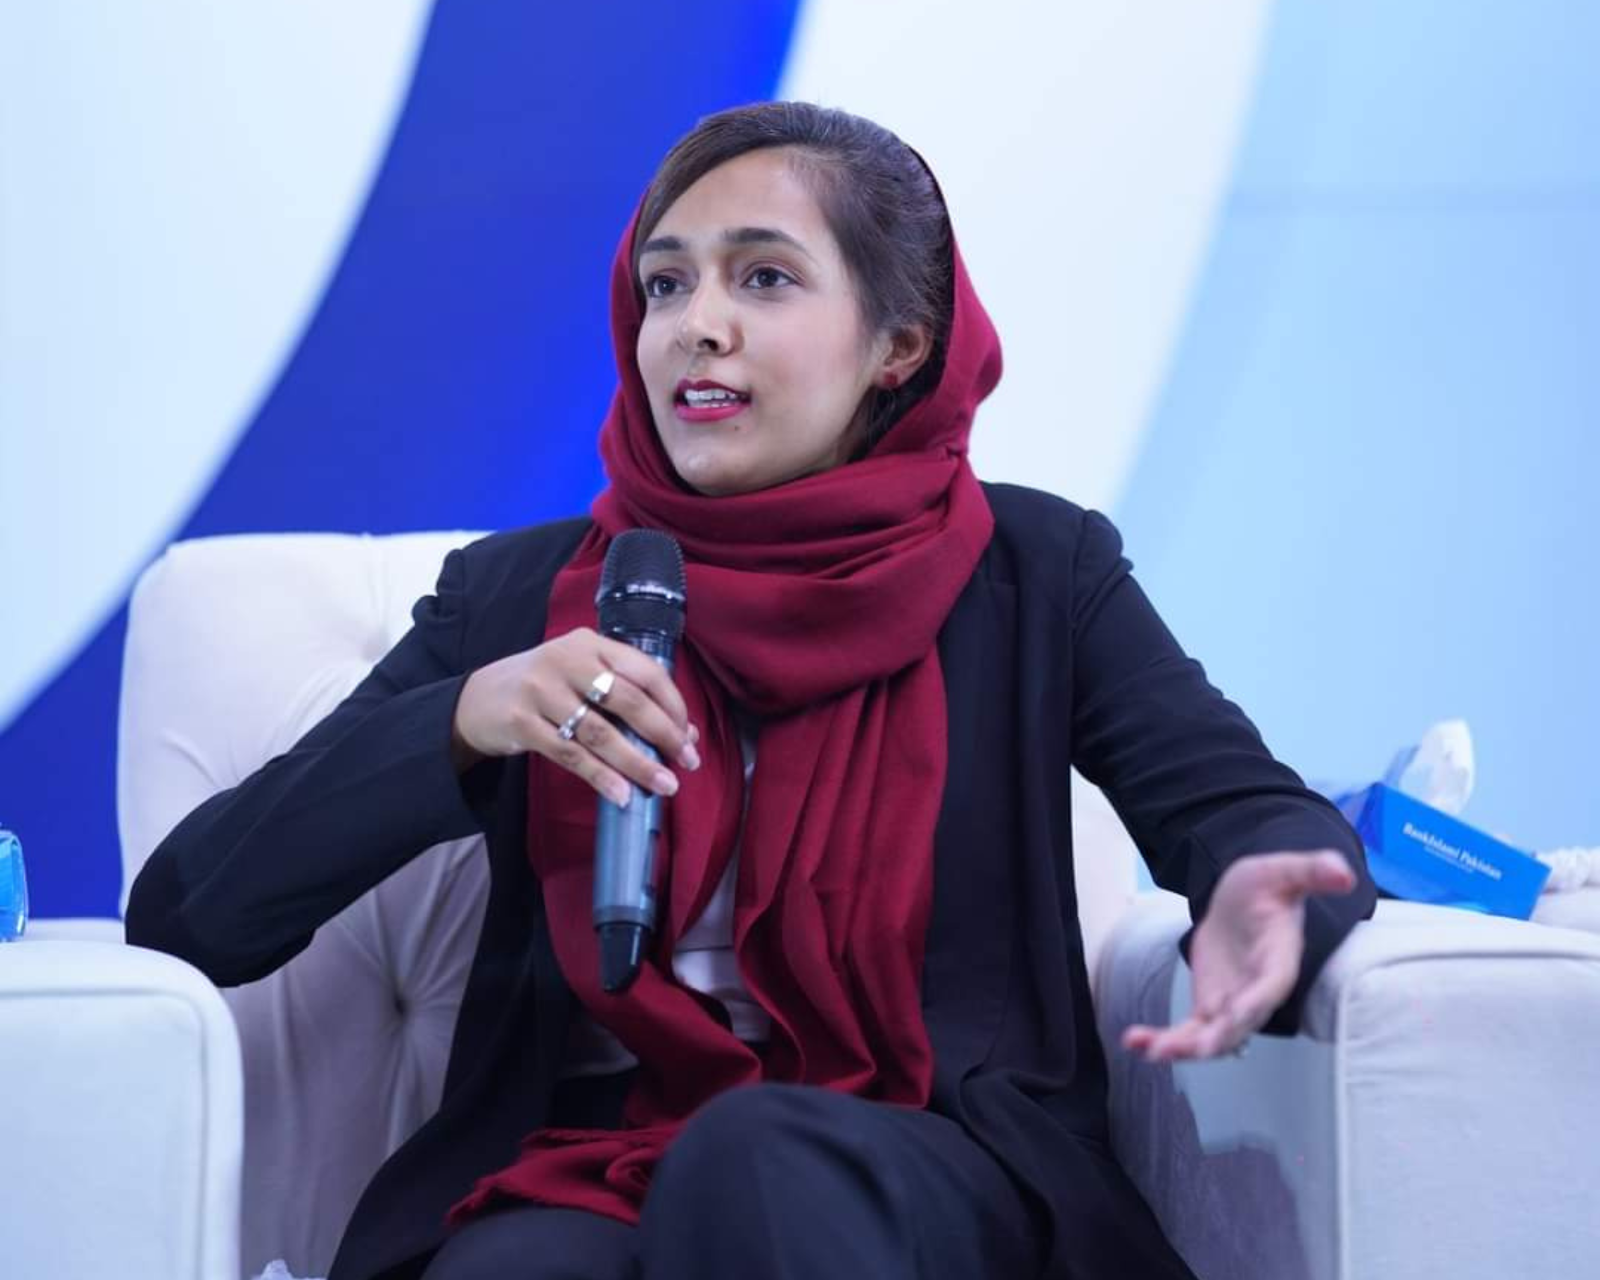 Photo of Aqsa Kausar holding a microphone